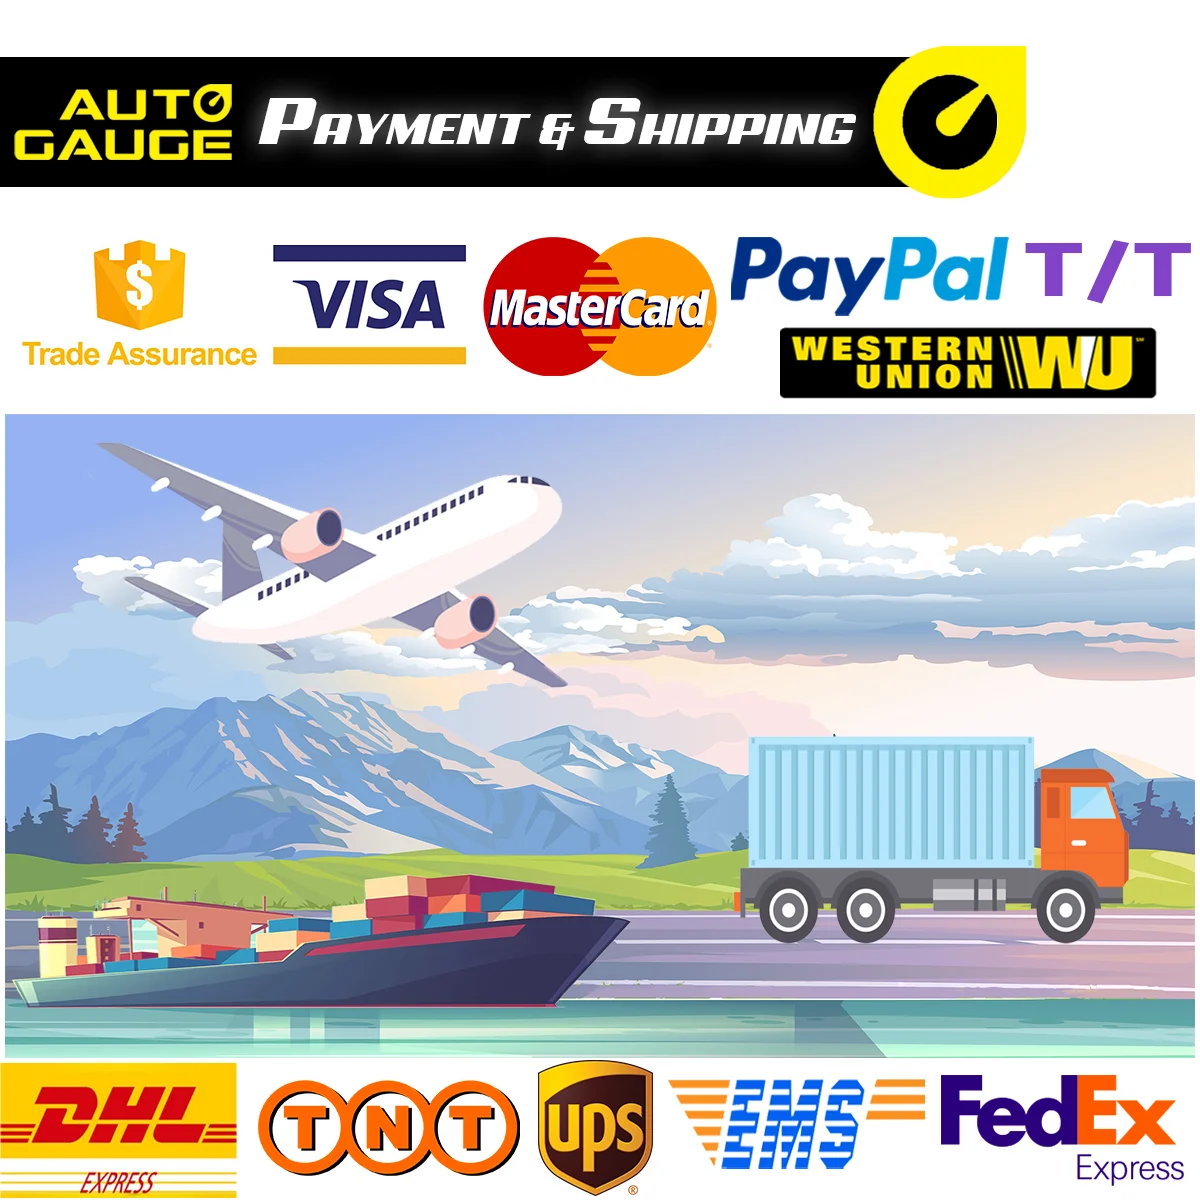 6.Payment & Shipping.png